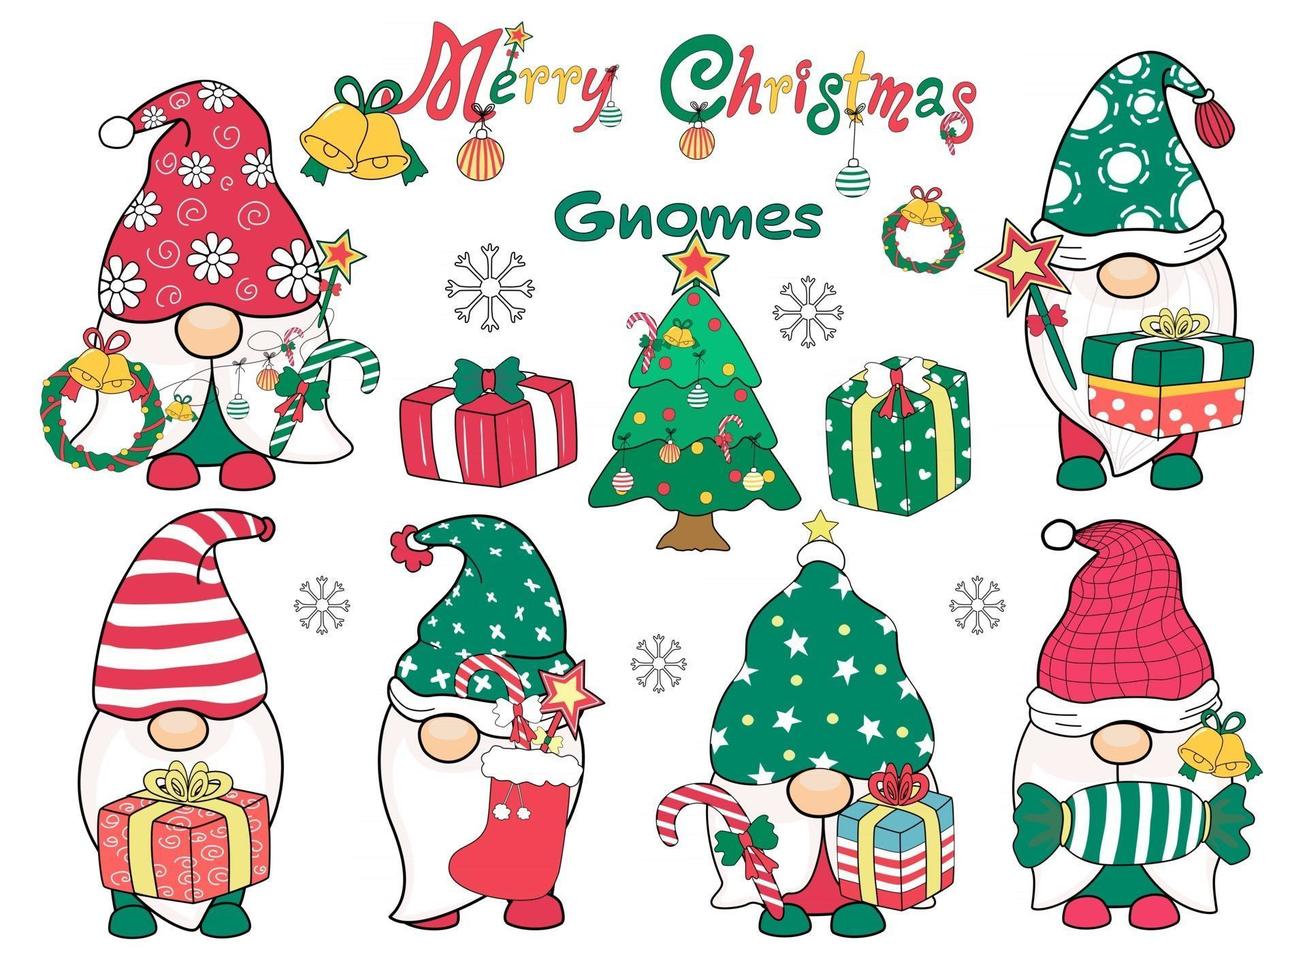 Merry Christmas Gnomes Designed in doodle style. It can be adapted to various applications such as backgrounds, invitation cards, digital print tshirt, design sticker, crafts, mugs DIY and more vector